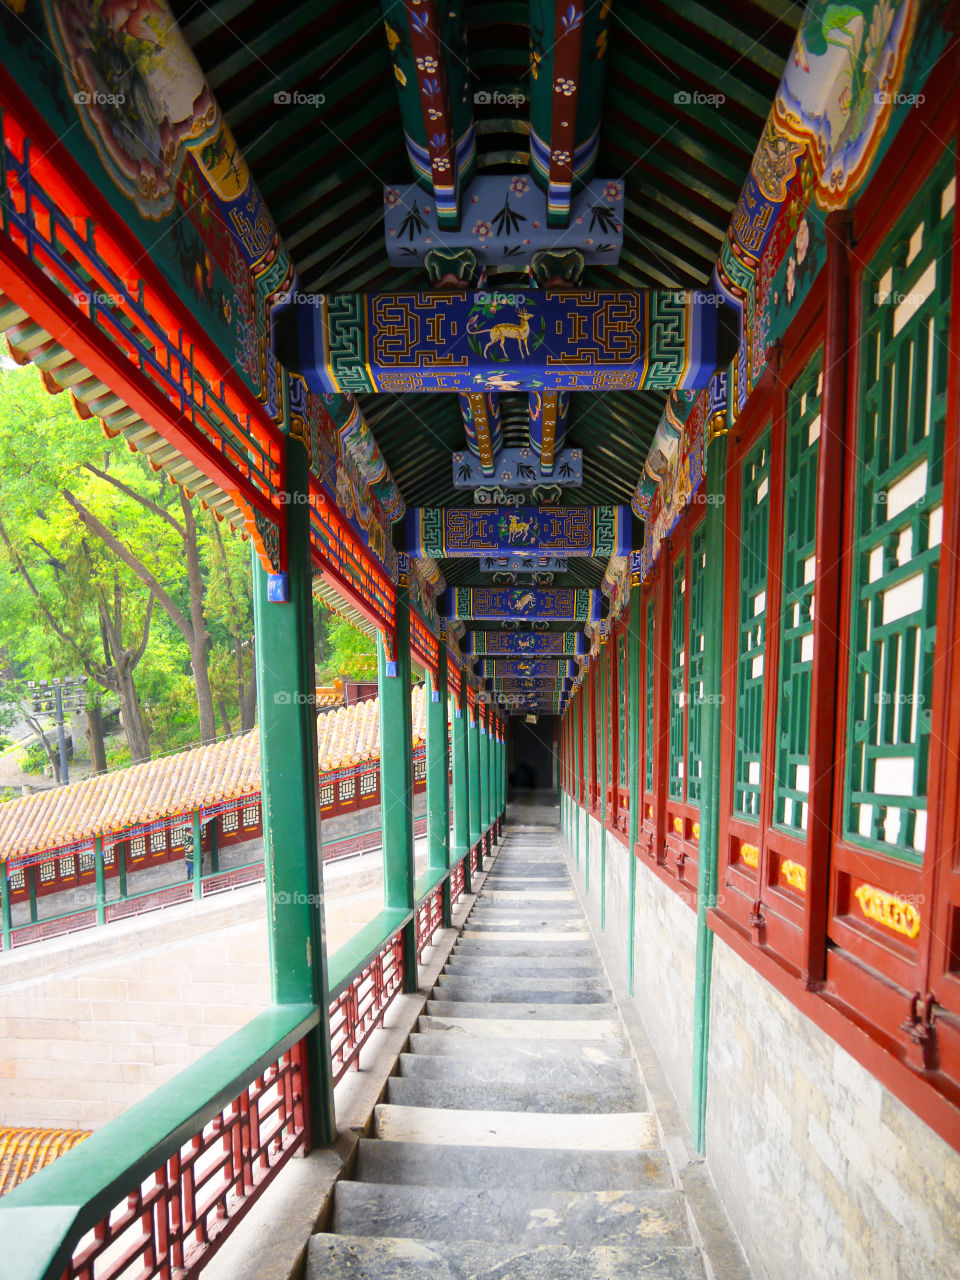 Details in the Summer Palace